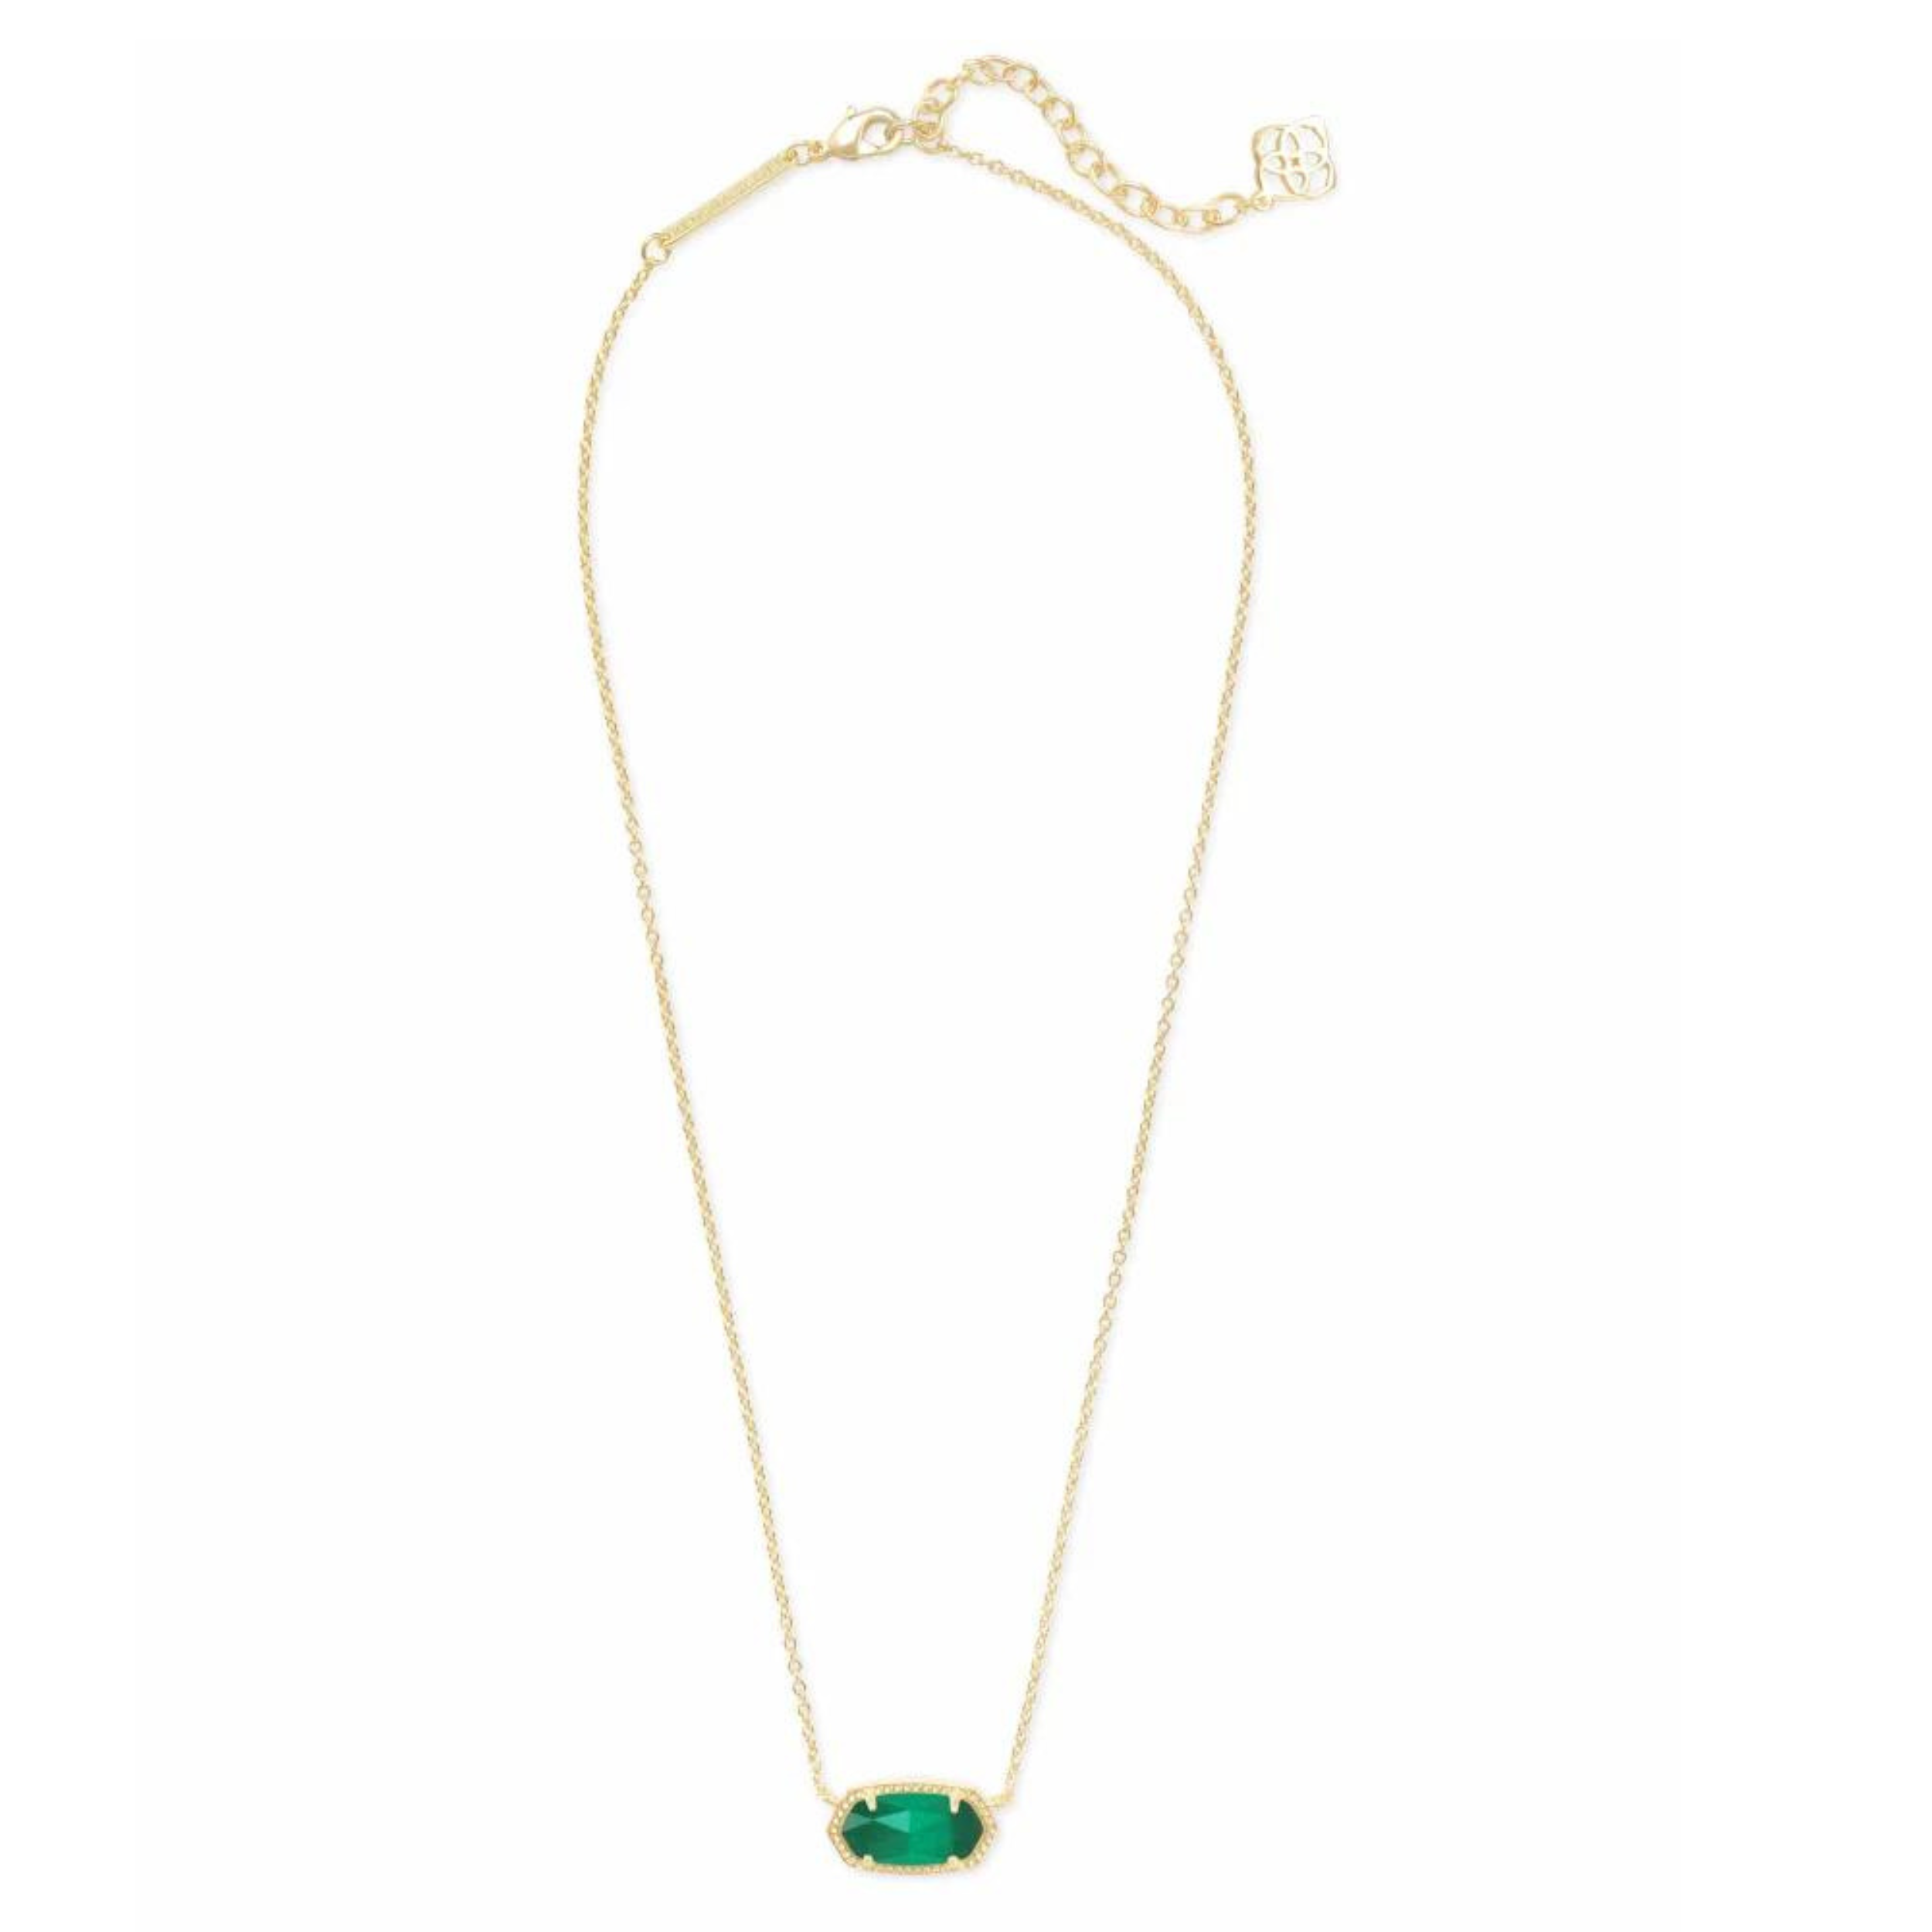 Kendra Scott |  Elisa Gold Pendant Necklace in Emerald Cat's Eye - Giddy Up Glamour Boutique